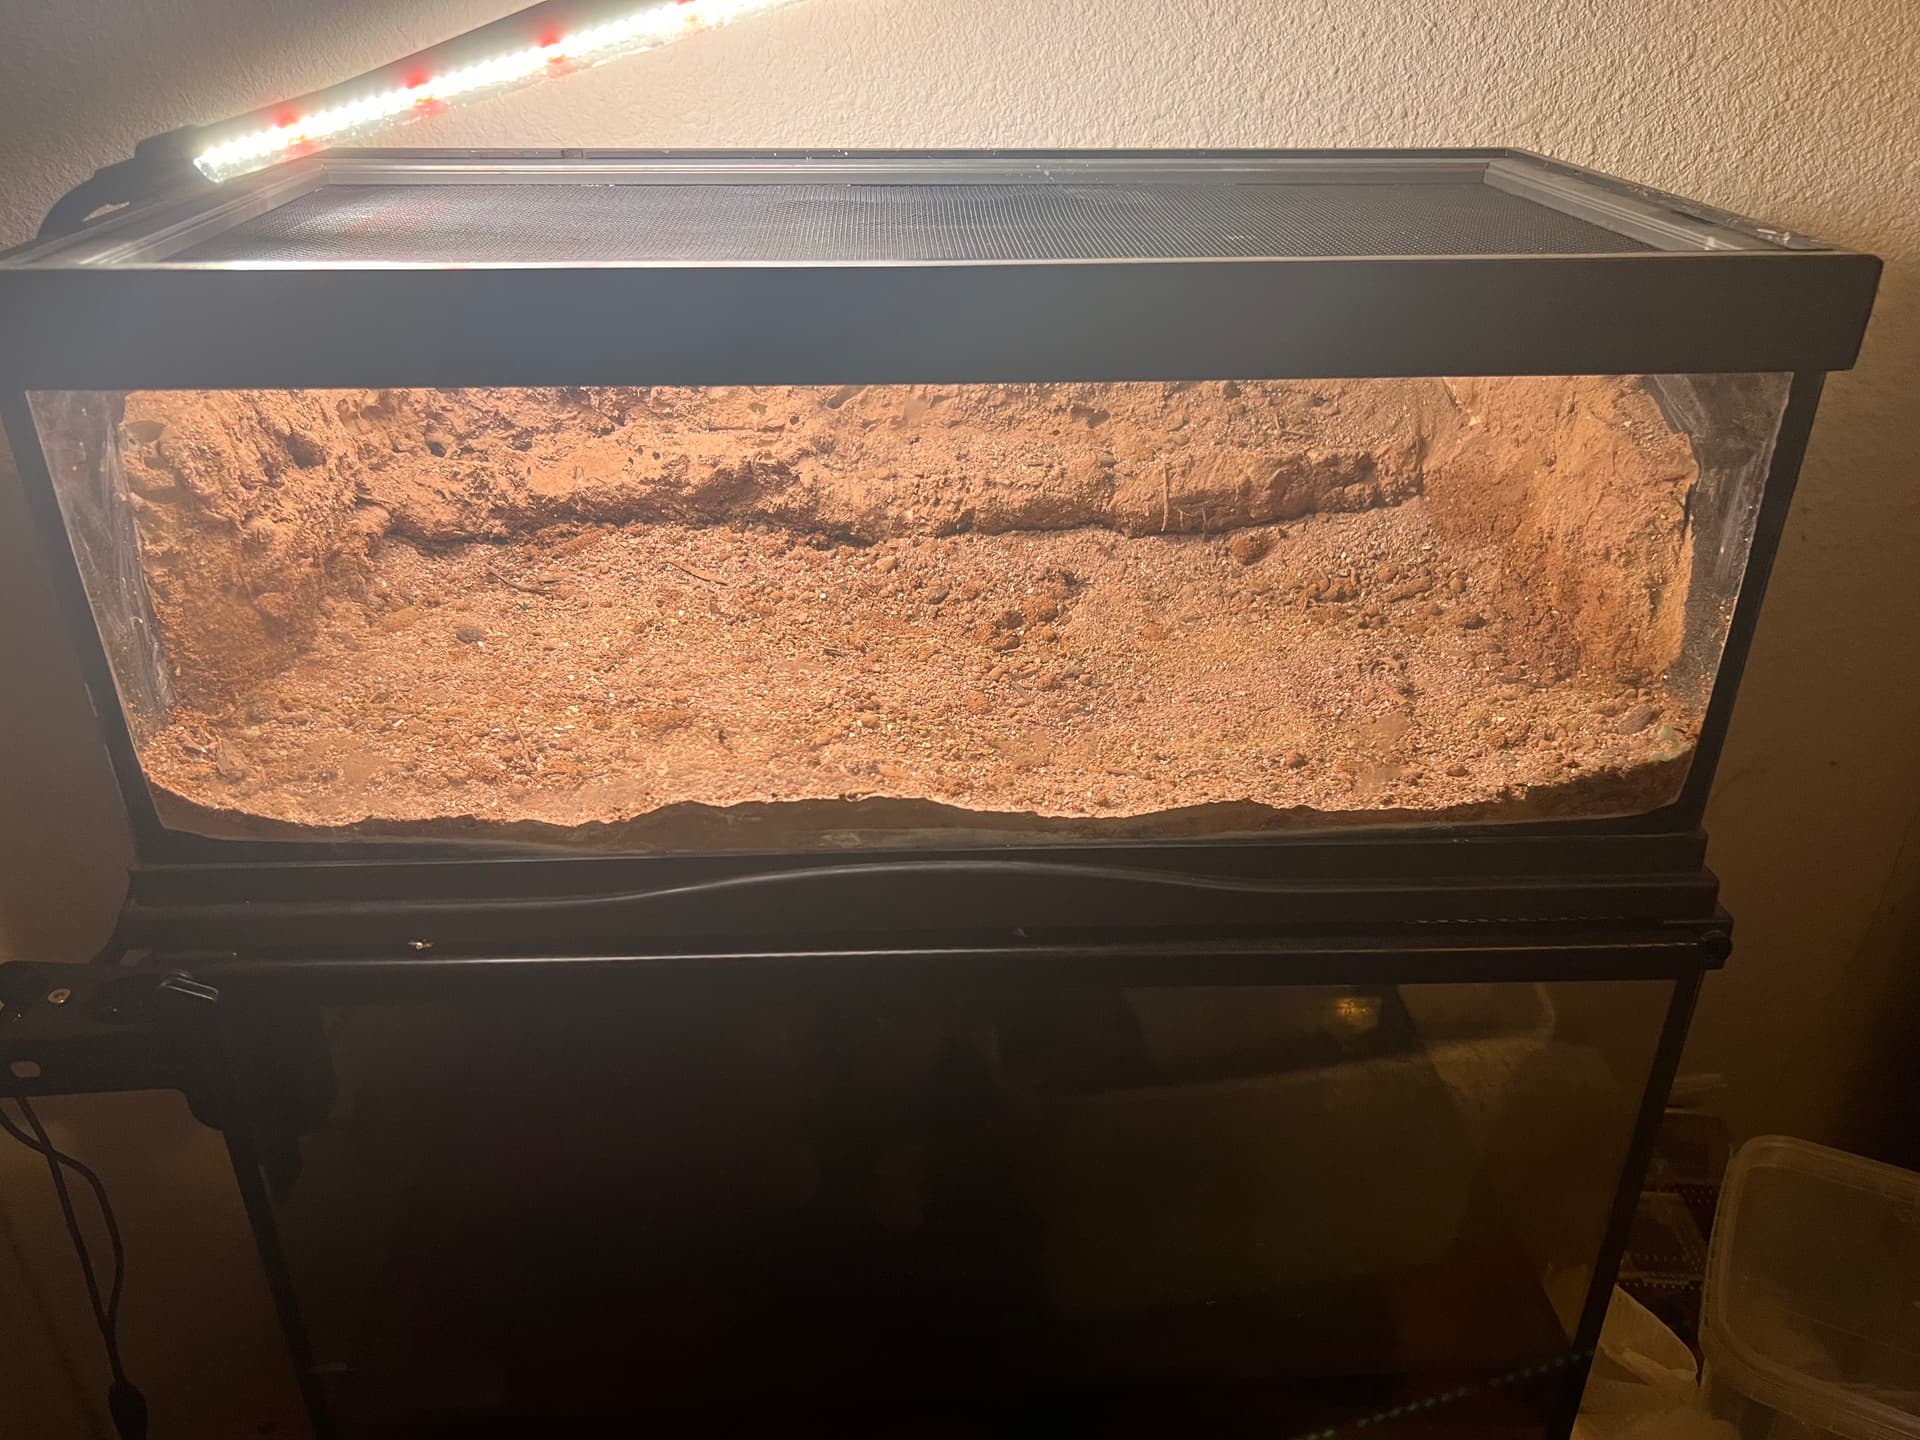 Leopard Gecko Tank with Excavator Clay 